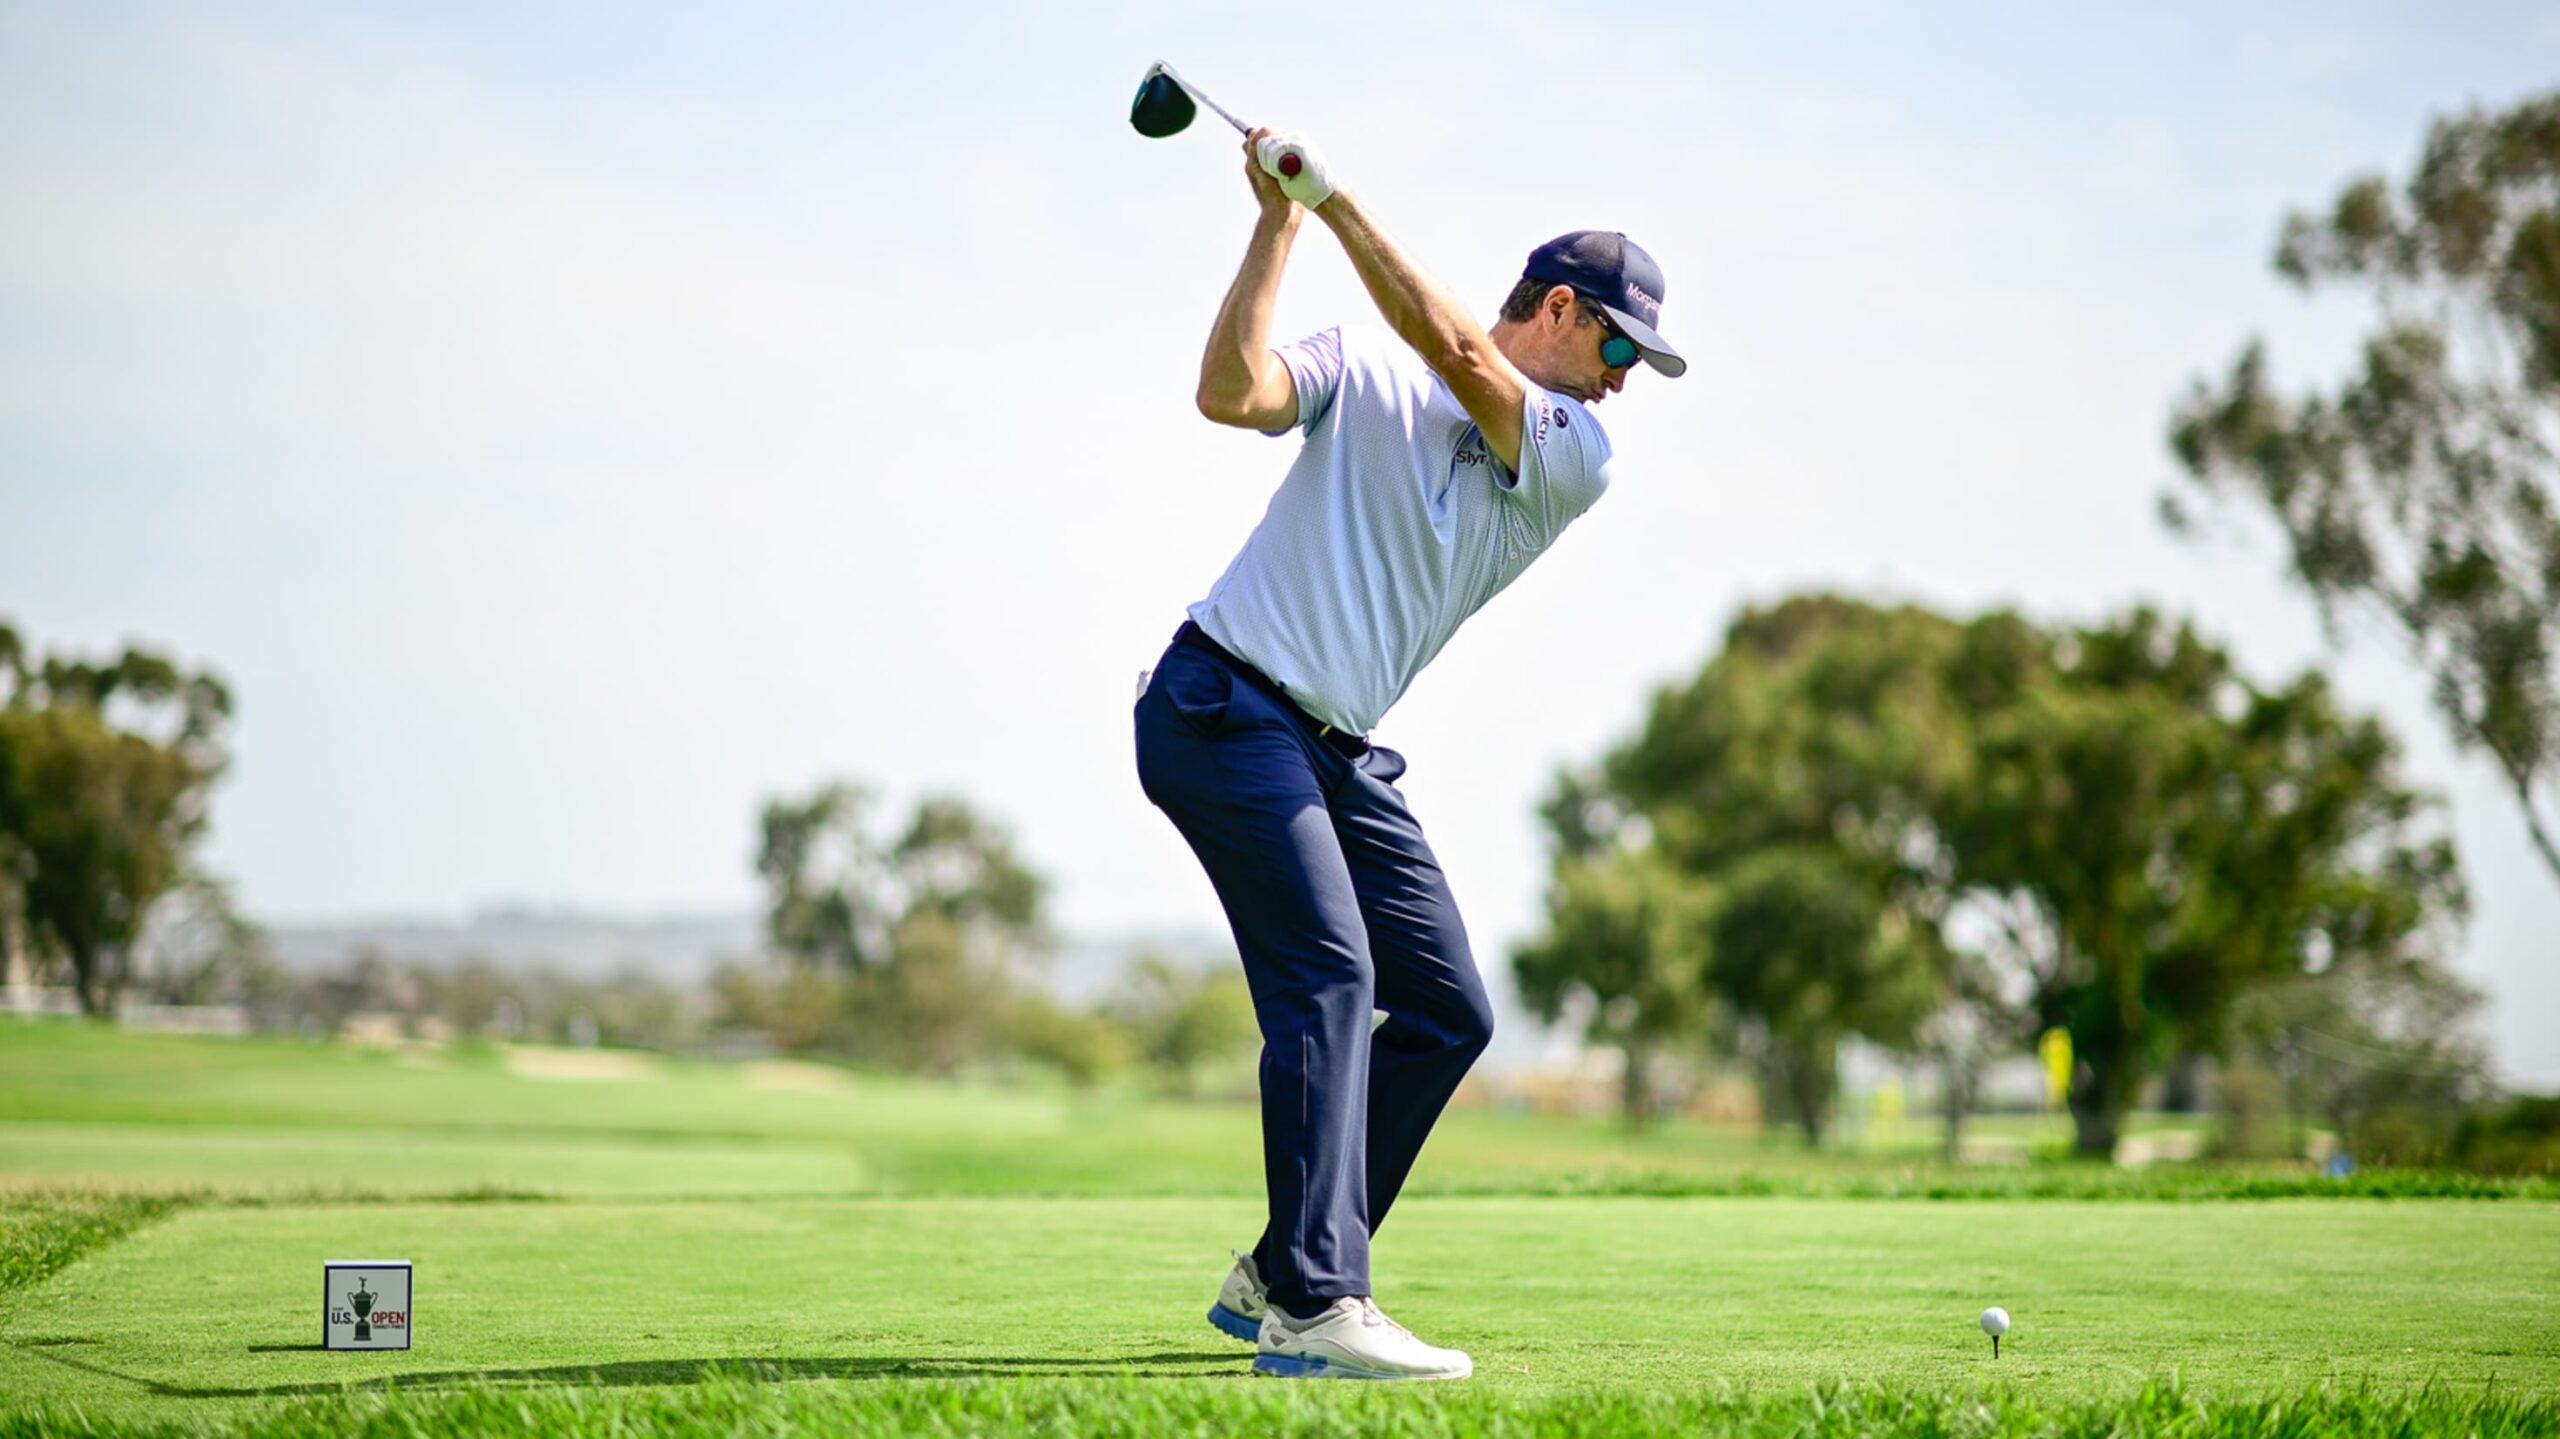 10 Health Benefits of Playing Golf That You May Not Know About - The ...